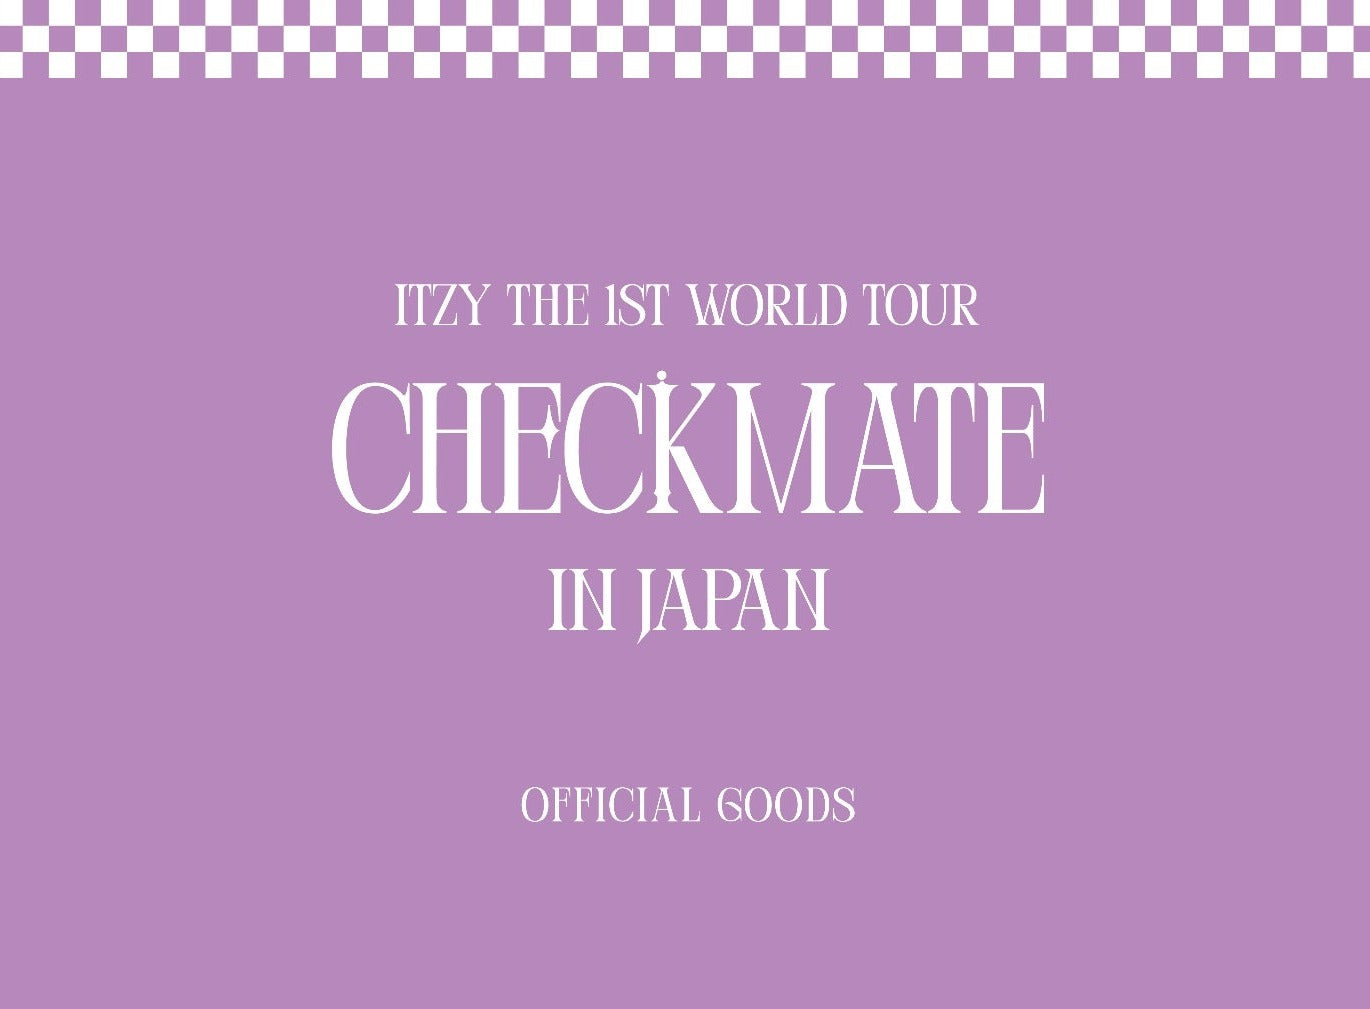 ITZY CHECKMATE The 1st World Tour: Cities And Ticket Details